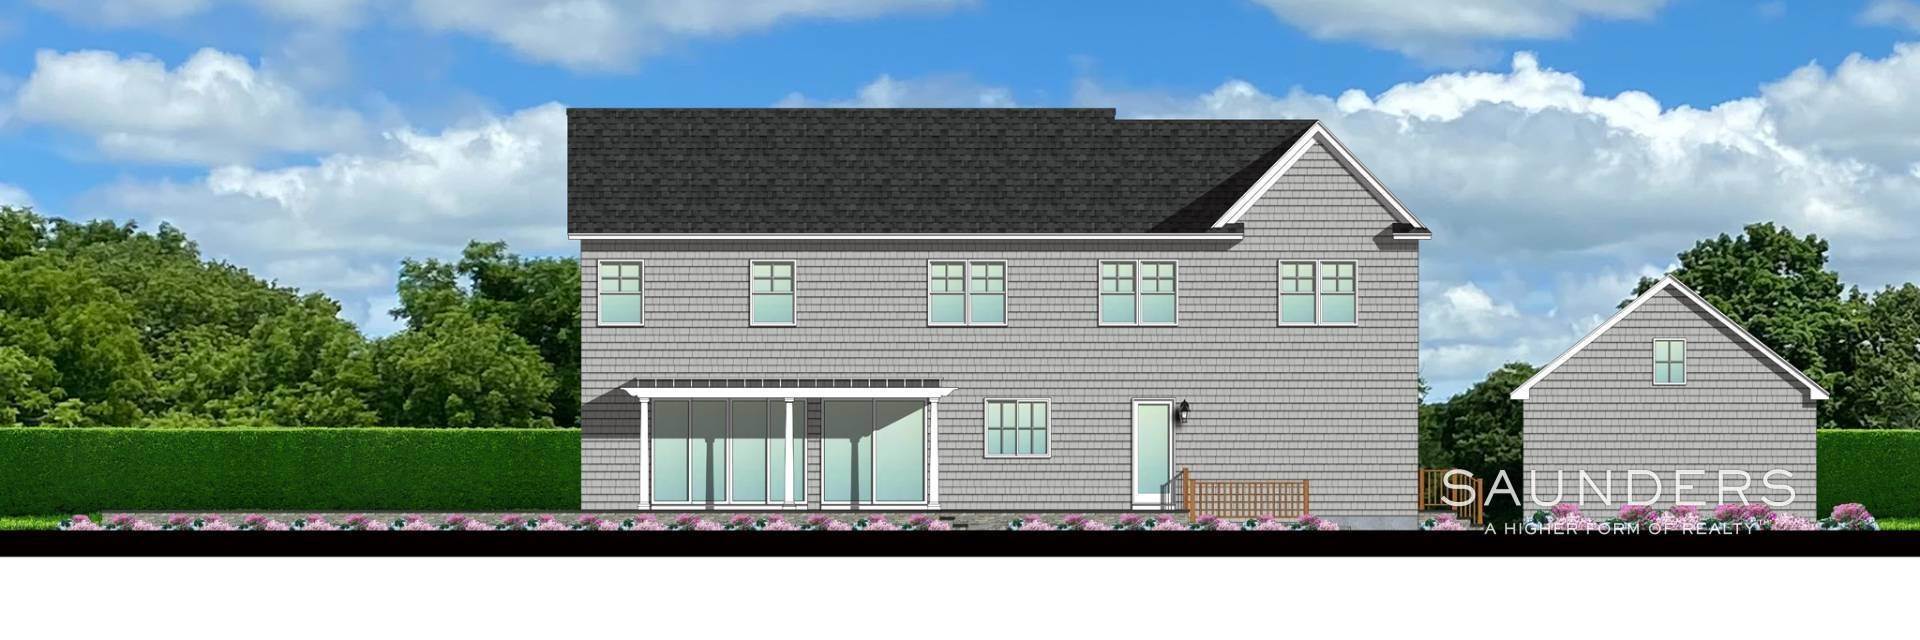 5. Single Family Homes for Sale at New Construction With Saltwater Pool In Desirable Quogue Village 46 Jessup Avenue, Quogue, NY 11959